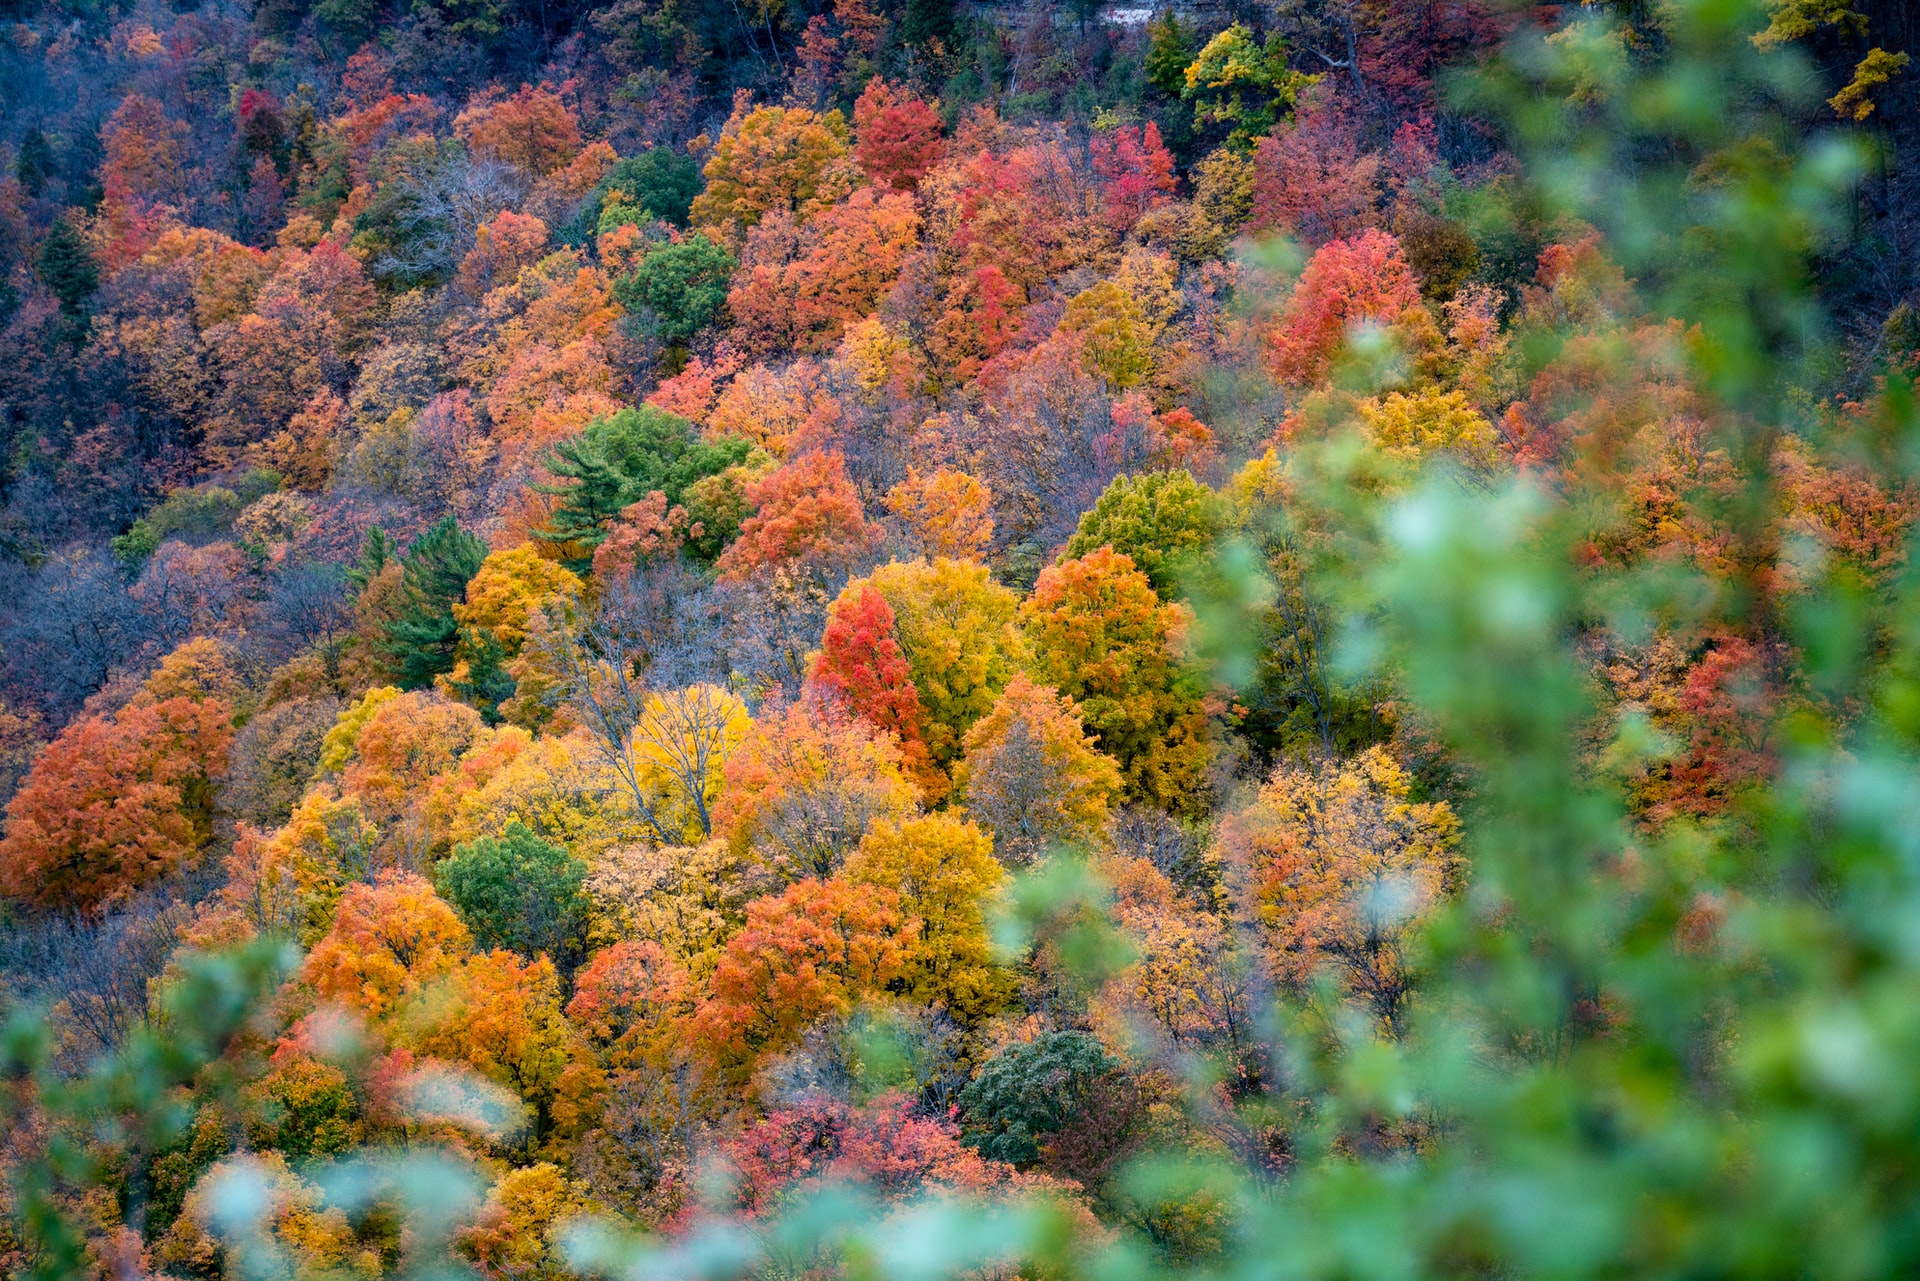 Forest Growing Season in Eastern U.S. Has Increased by a Month